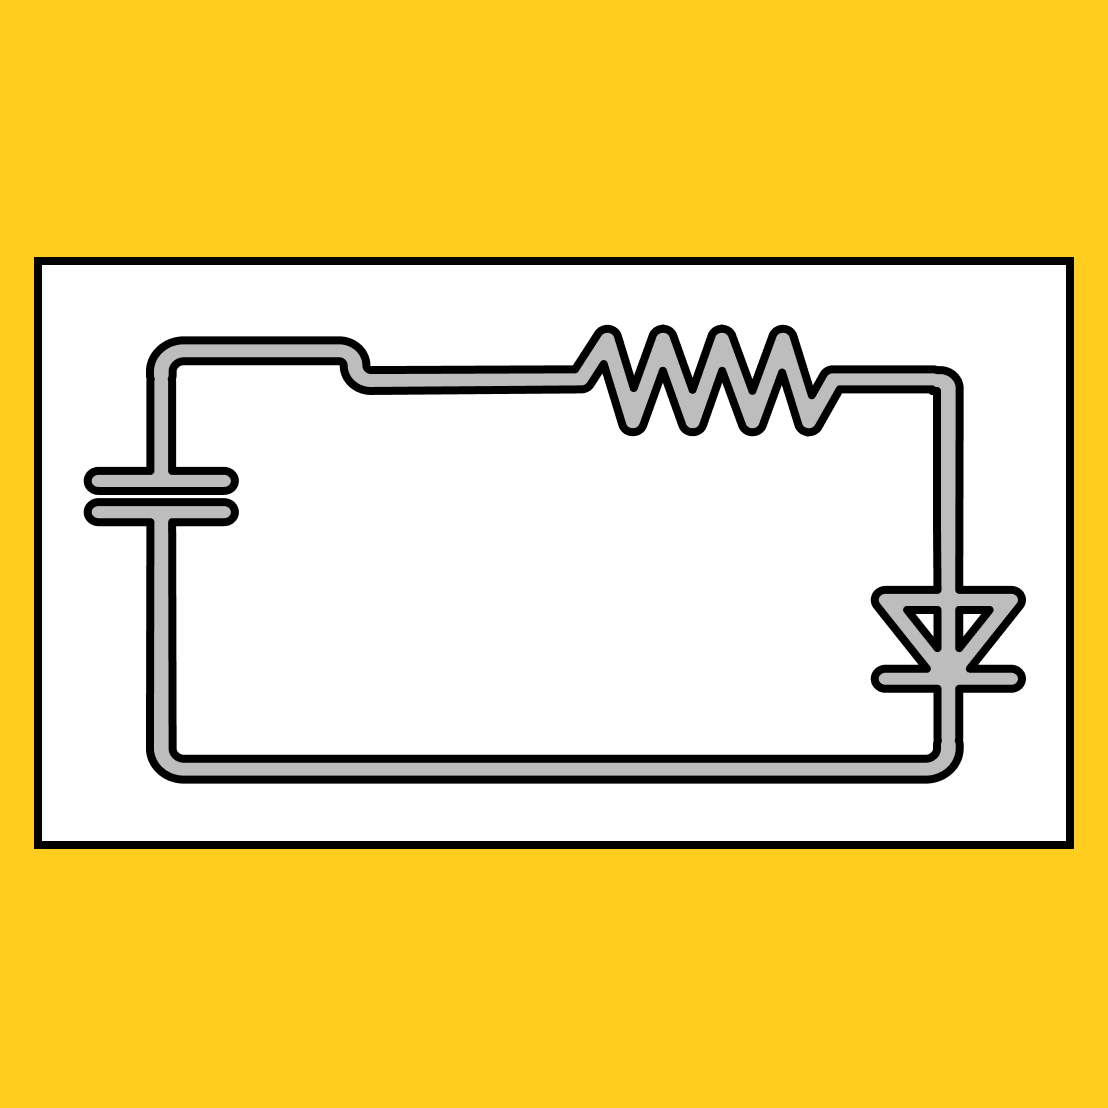 Professional Electrical Schematic Diagrams Maker